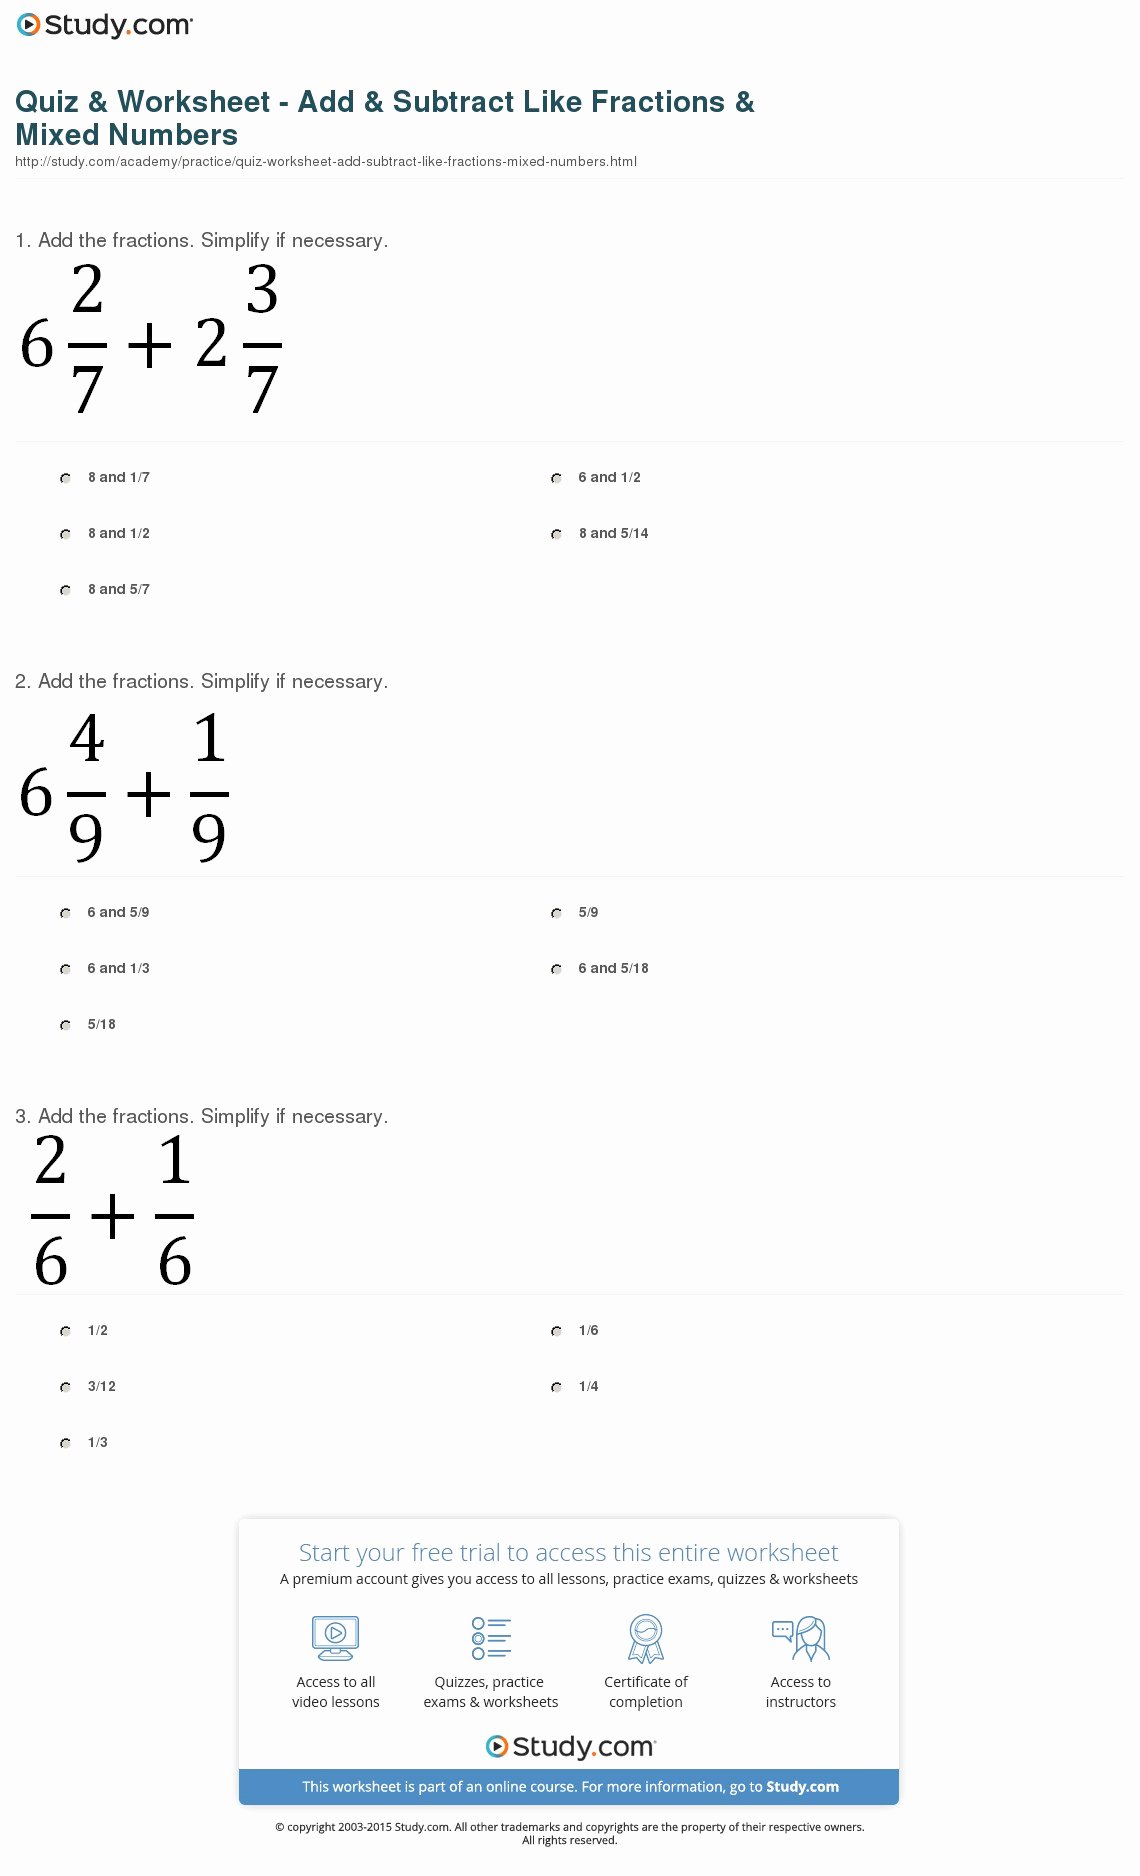 Adding Mixed Numbers Worksheet Unique Quiz & Worksheet Add & Subtract Like Fractions & Mixed